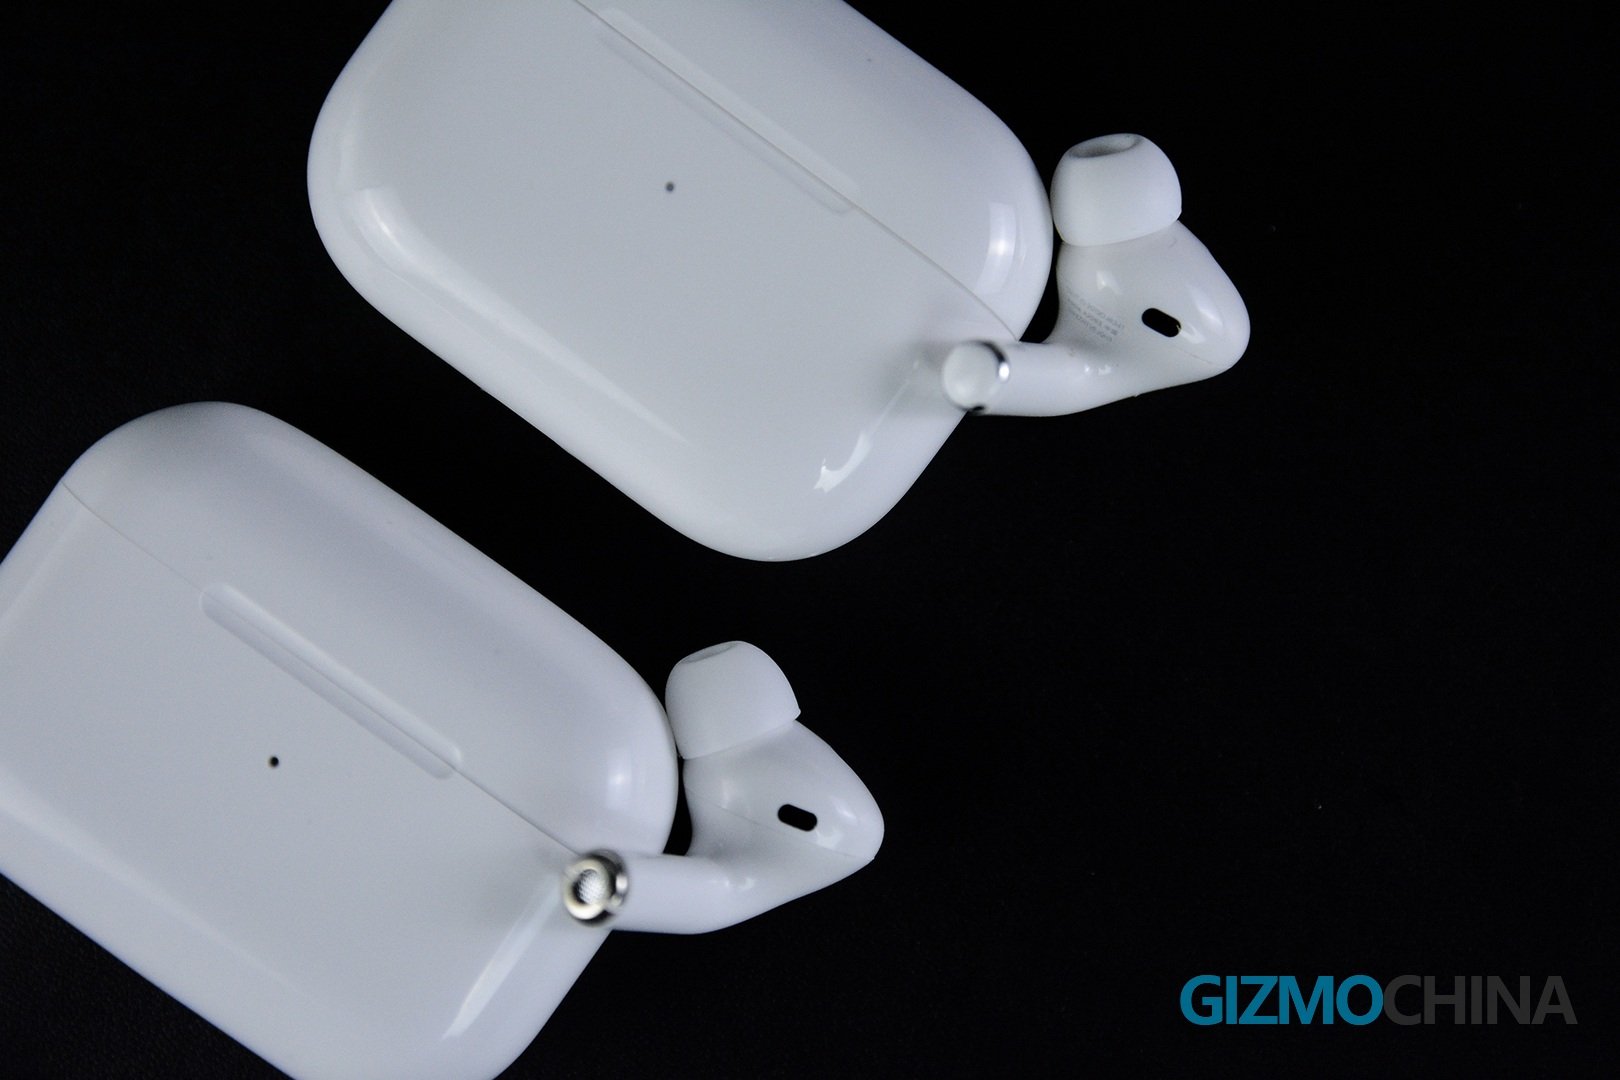 Fake AirPods Pro Hands-On Review: $59 KnockOff Earbuds gets very close to the real deal - Gizmochina